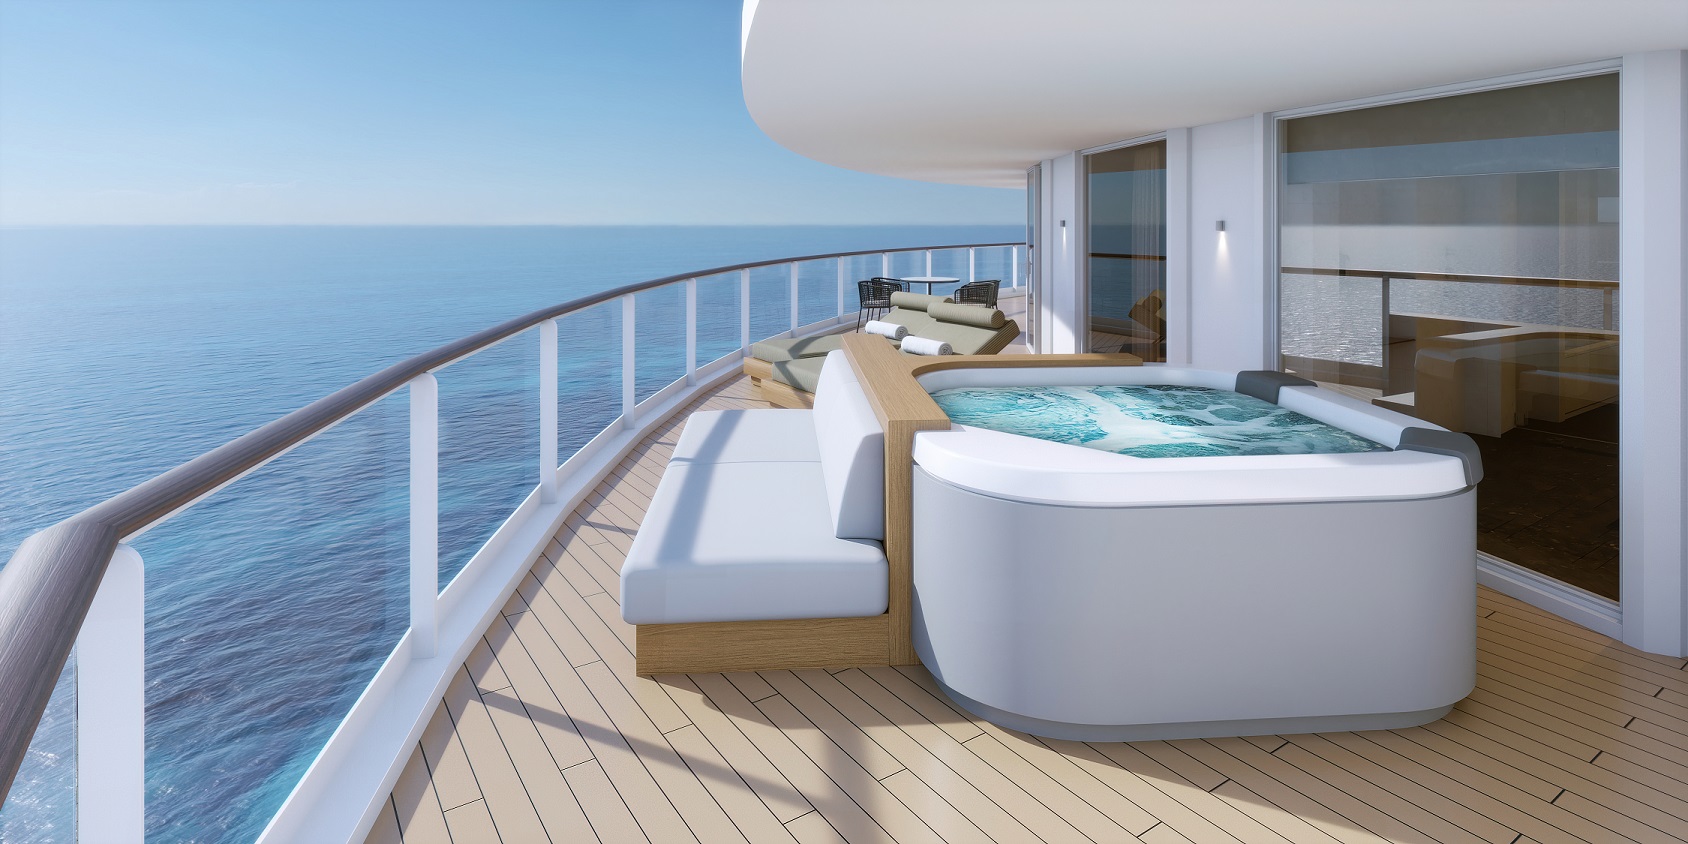 Norwegian Cruise Line announce new class of ship, with more open spaces and art onboard